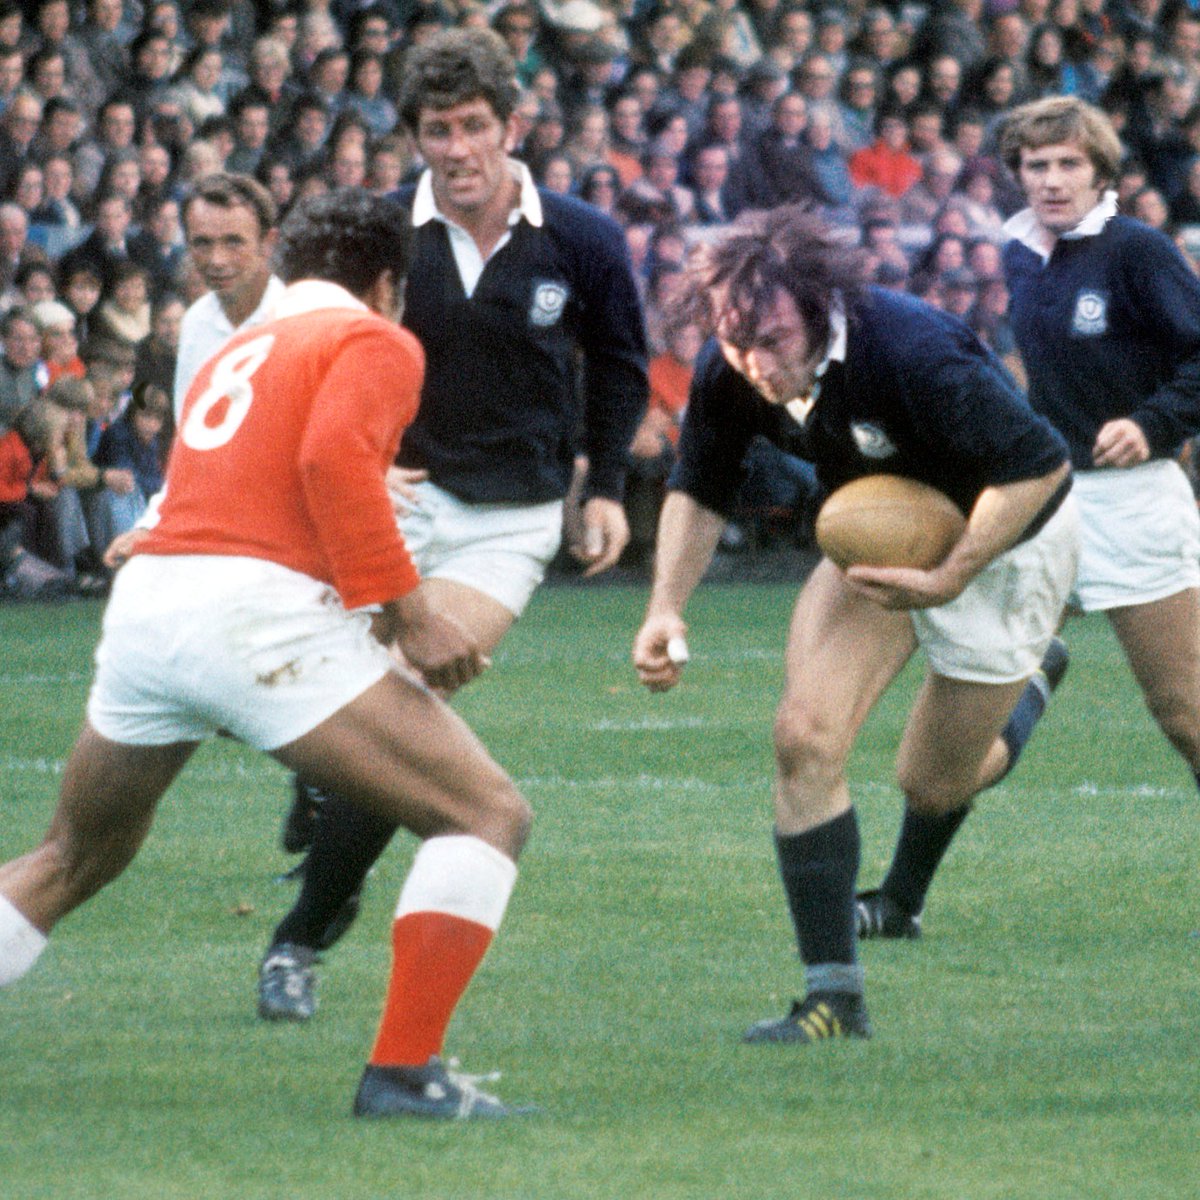 🏴󠁧󠁢󠁳󠁣󠁴󠁿 The first Scot to reach 50 caps. 🏉 An outstanding ambassador for the sport. ⭐️ Star for @lionsofficial & @Barbarian_FC. On what would have been his 79th birthday, join us in this chance to celebrate Sandy Carmichael MBE. One of our all time greats.